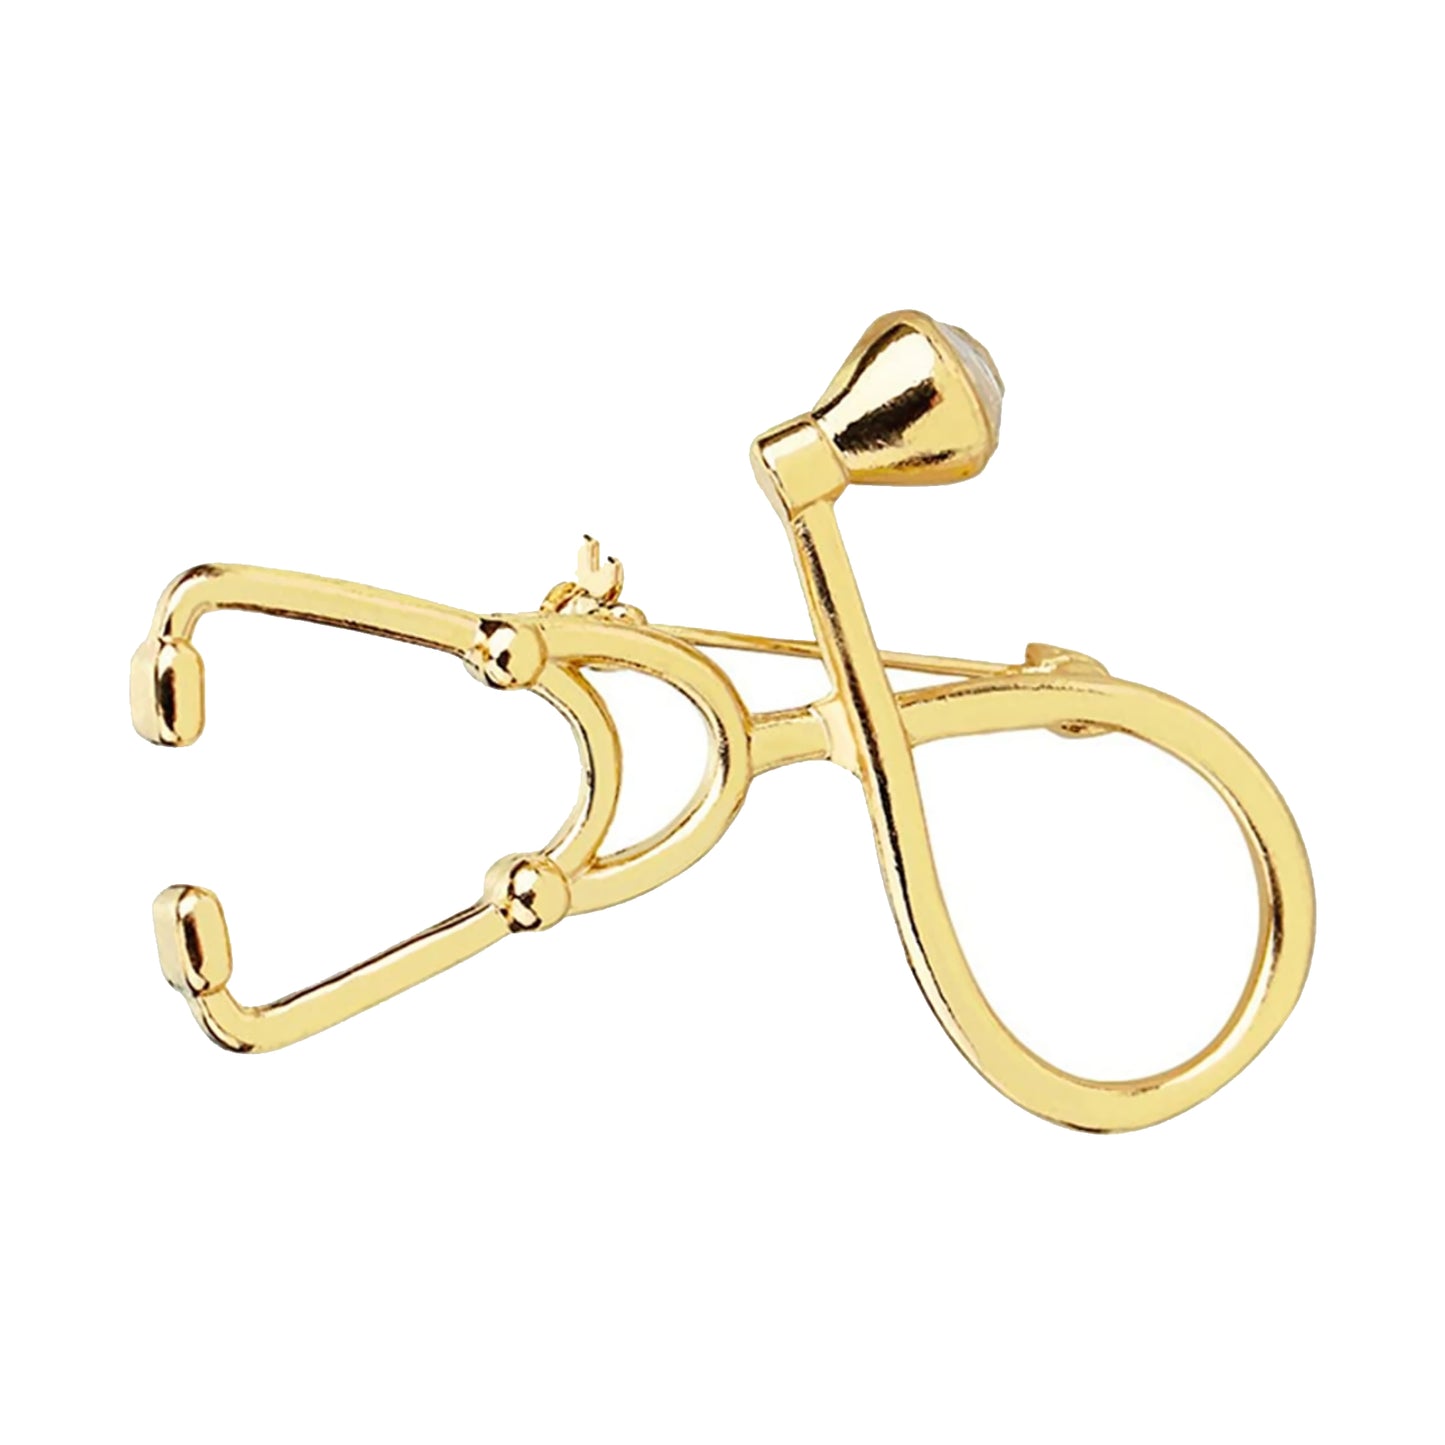 Stethoscope Brooch - Gold and Silver